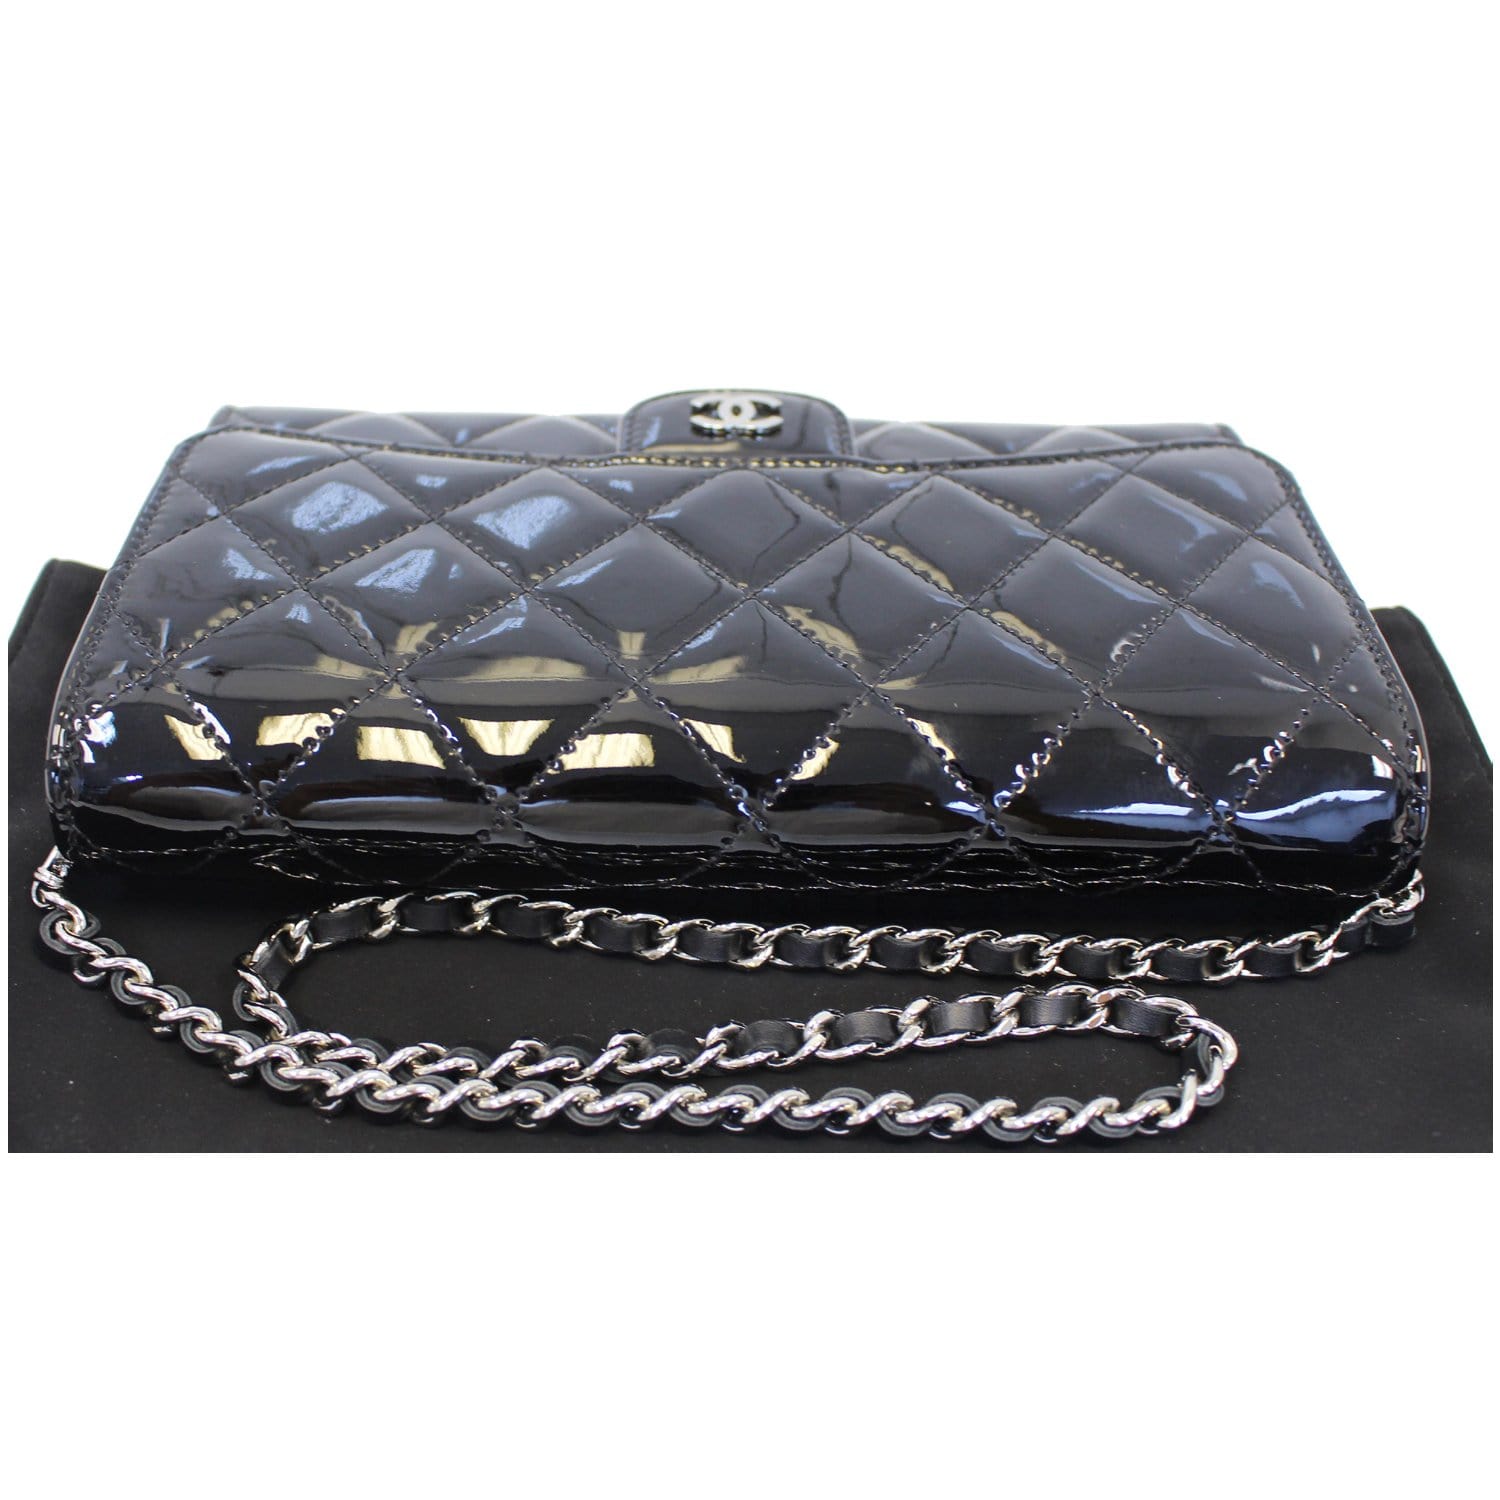 ❤️ Loved Chanel Black Patent Shoulder Bag - Tag Included From